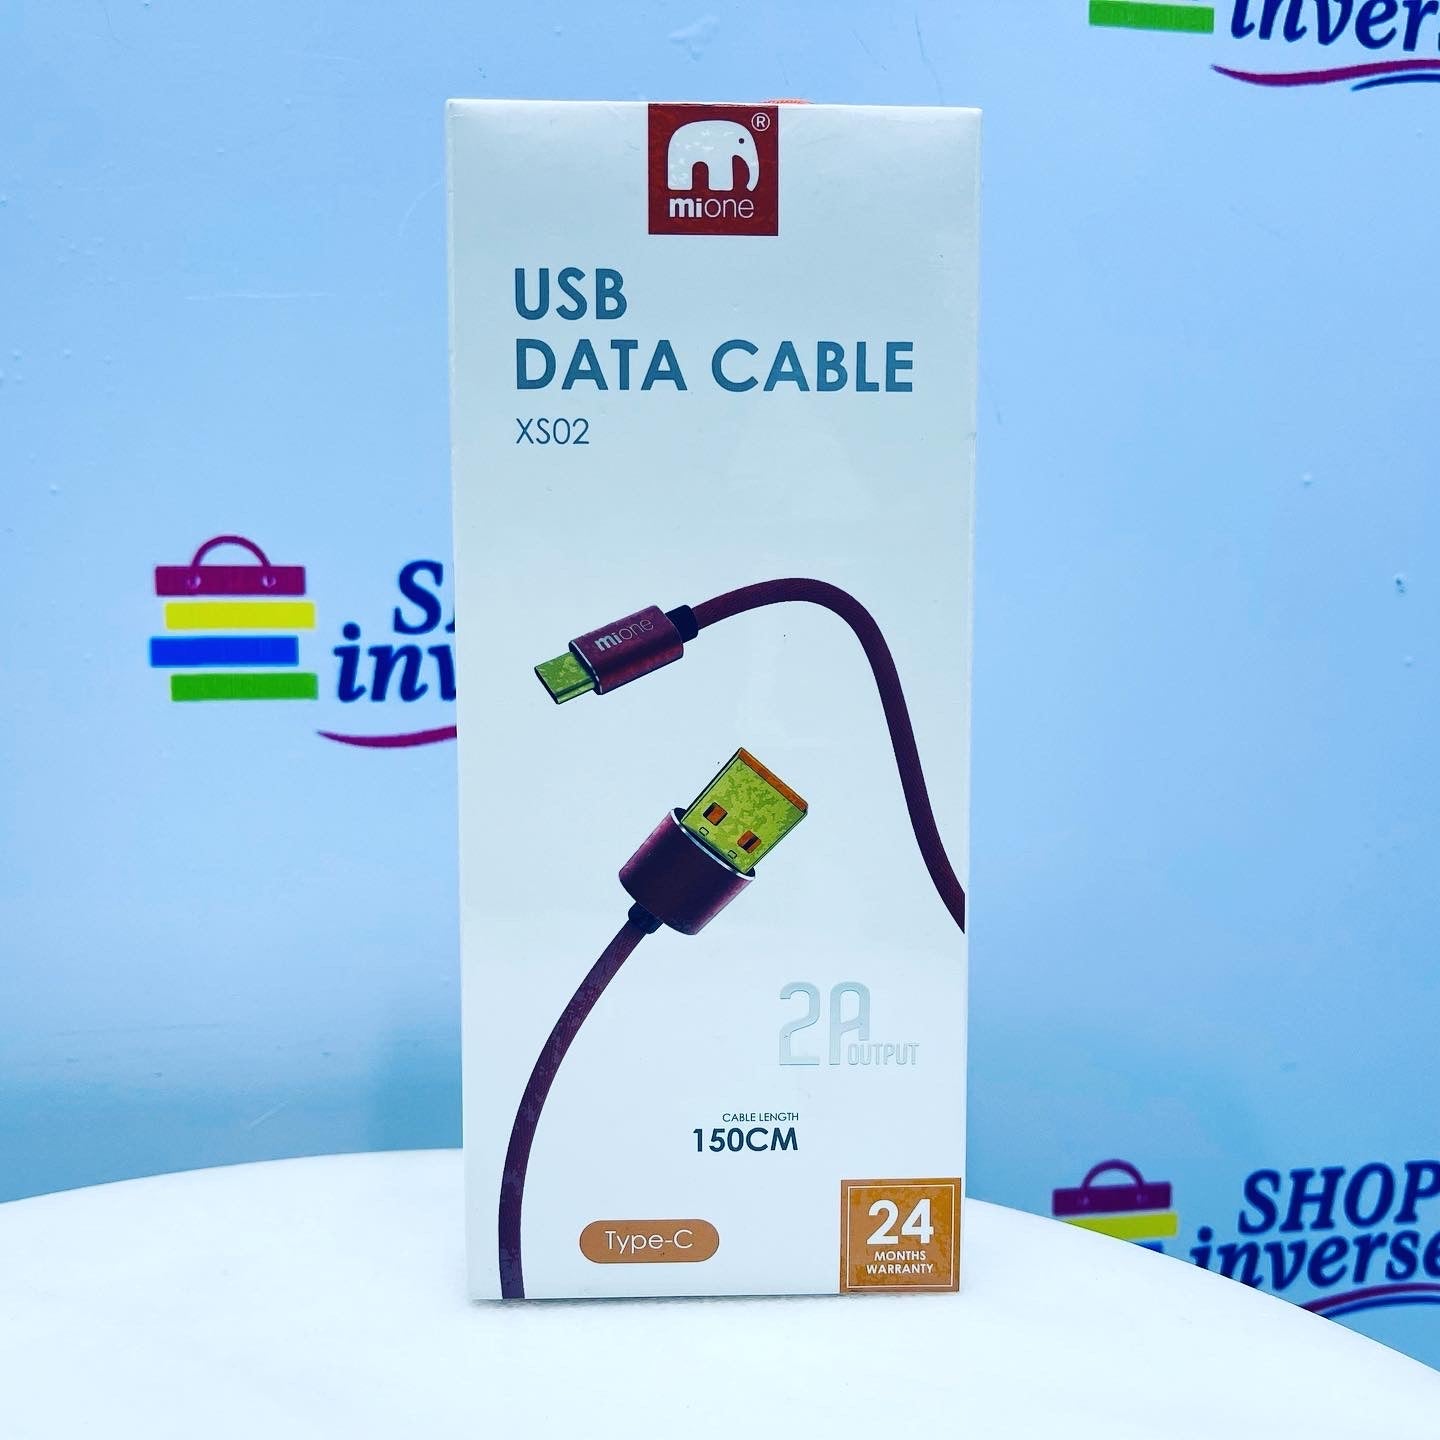 Mione XS02 Type-C USB Data Cable SHOPINVERSE